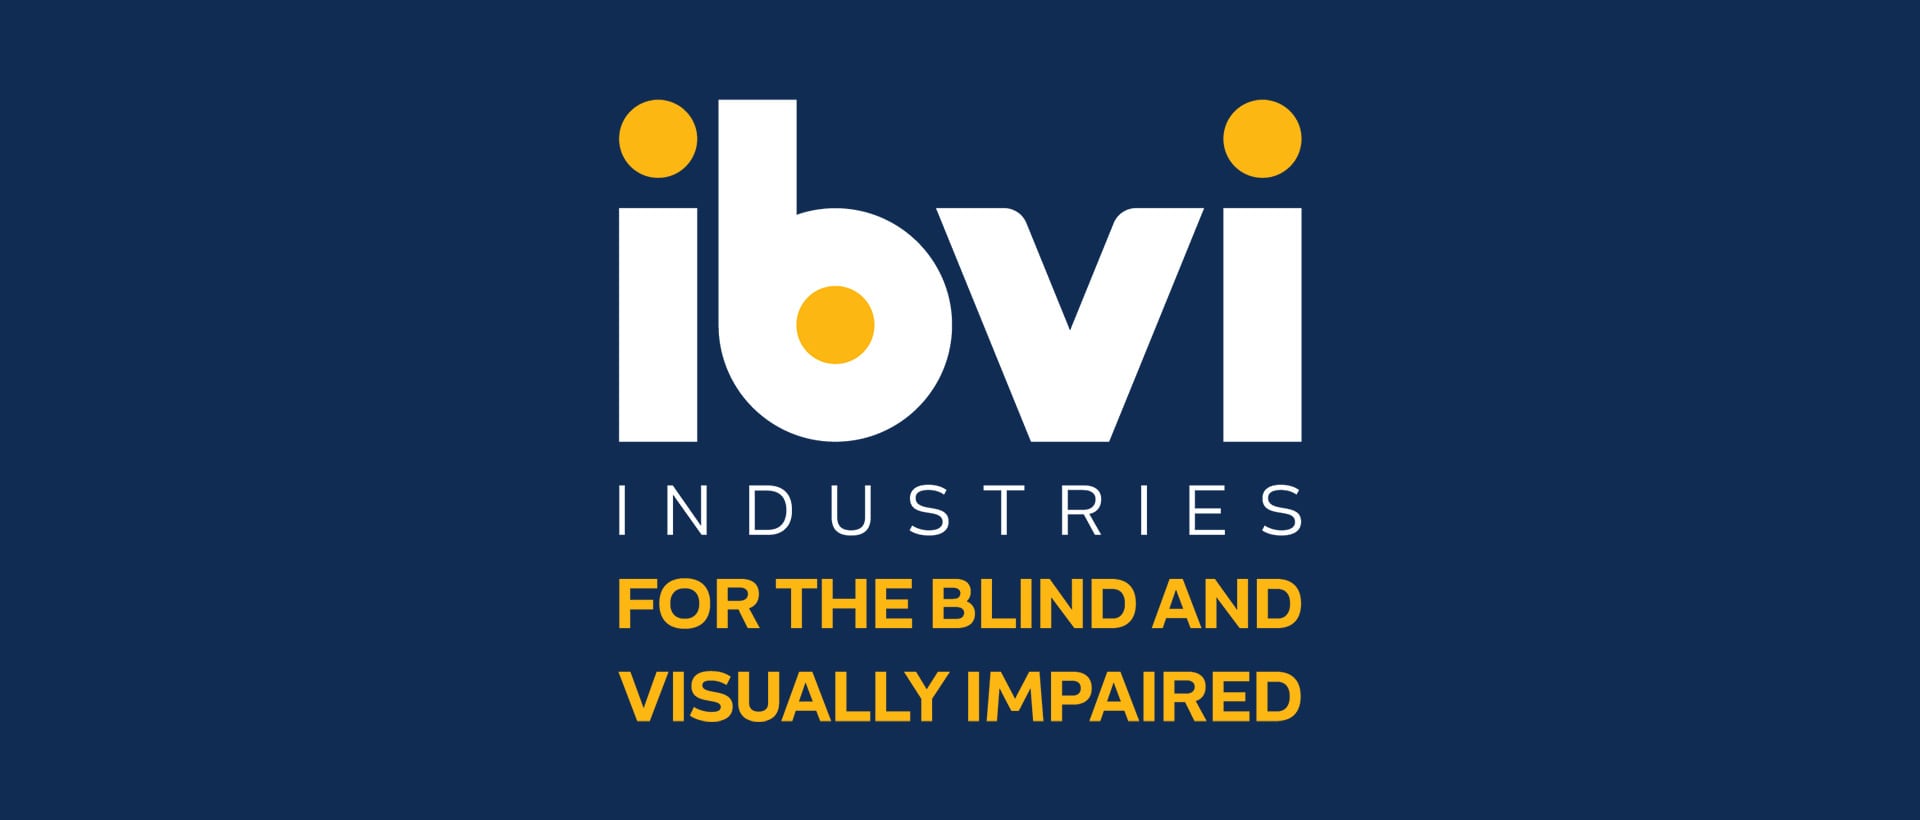 Industries For the Blind and Visually Impaired (IBVI)